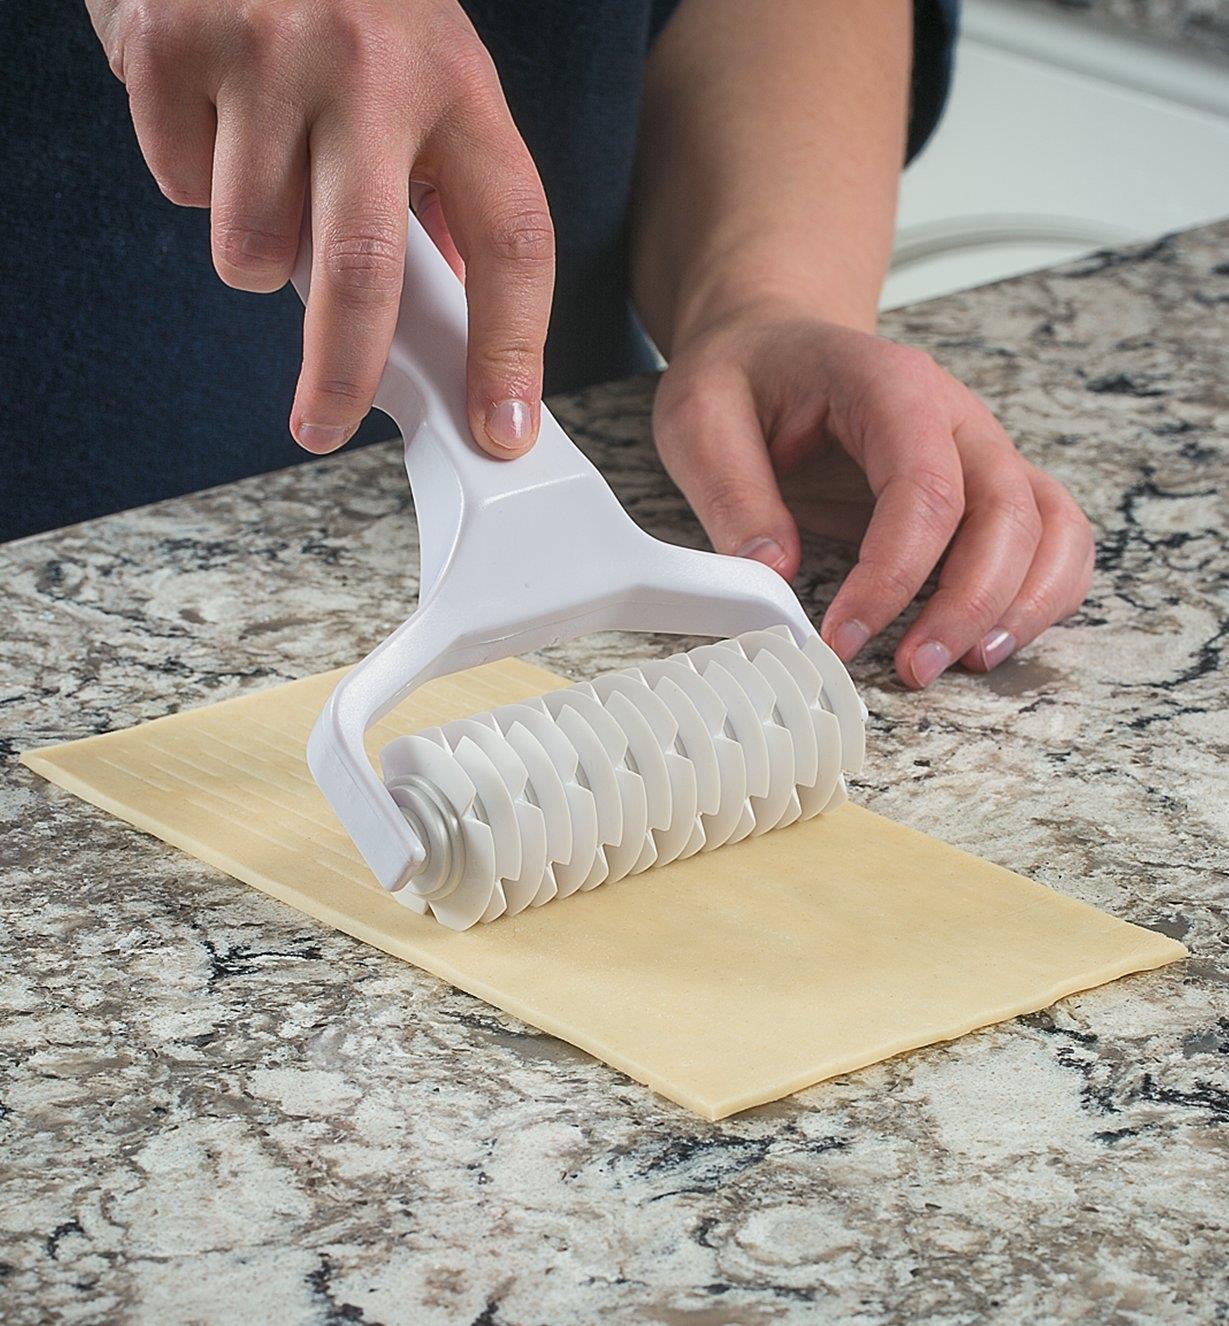 Lattice Cutter being rolled through dough on a countertop